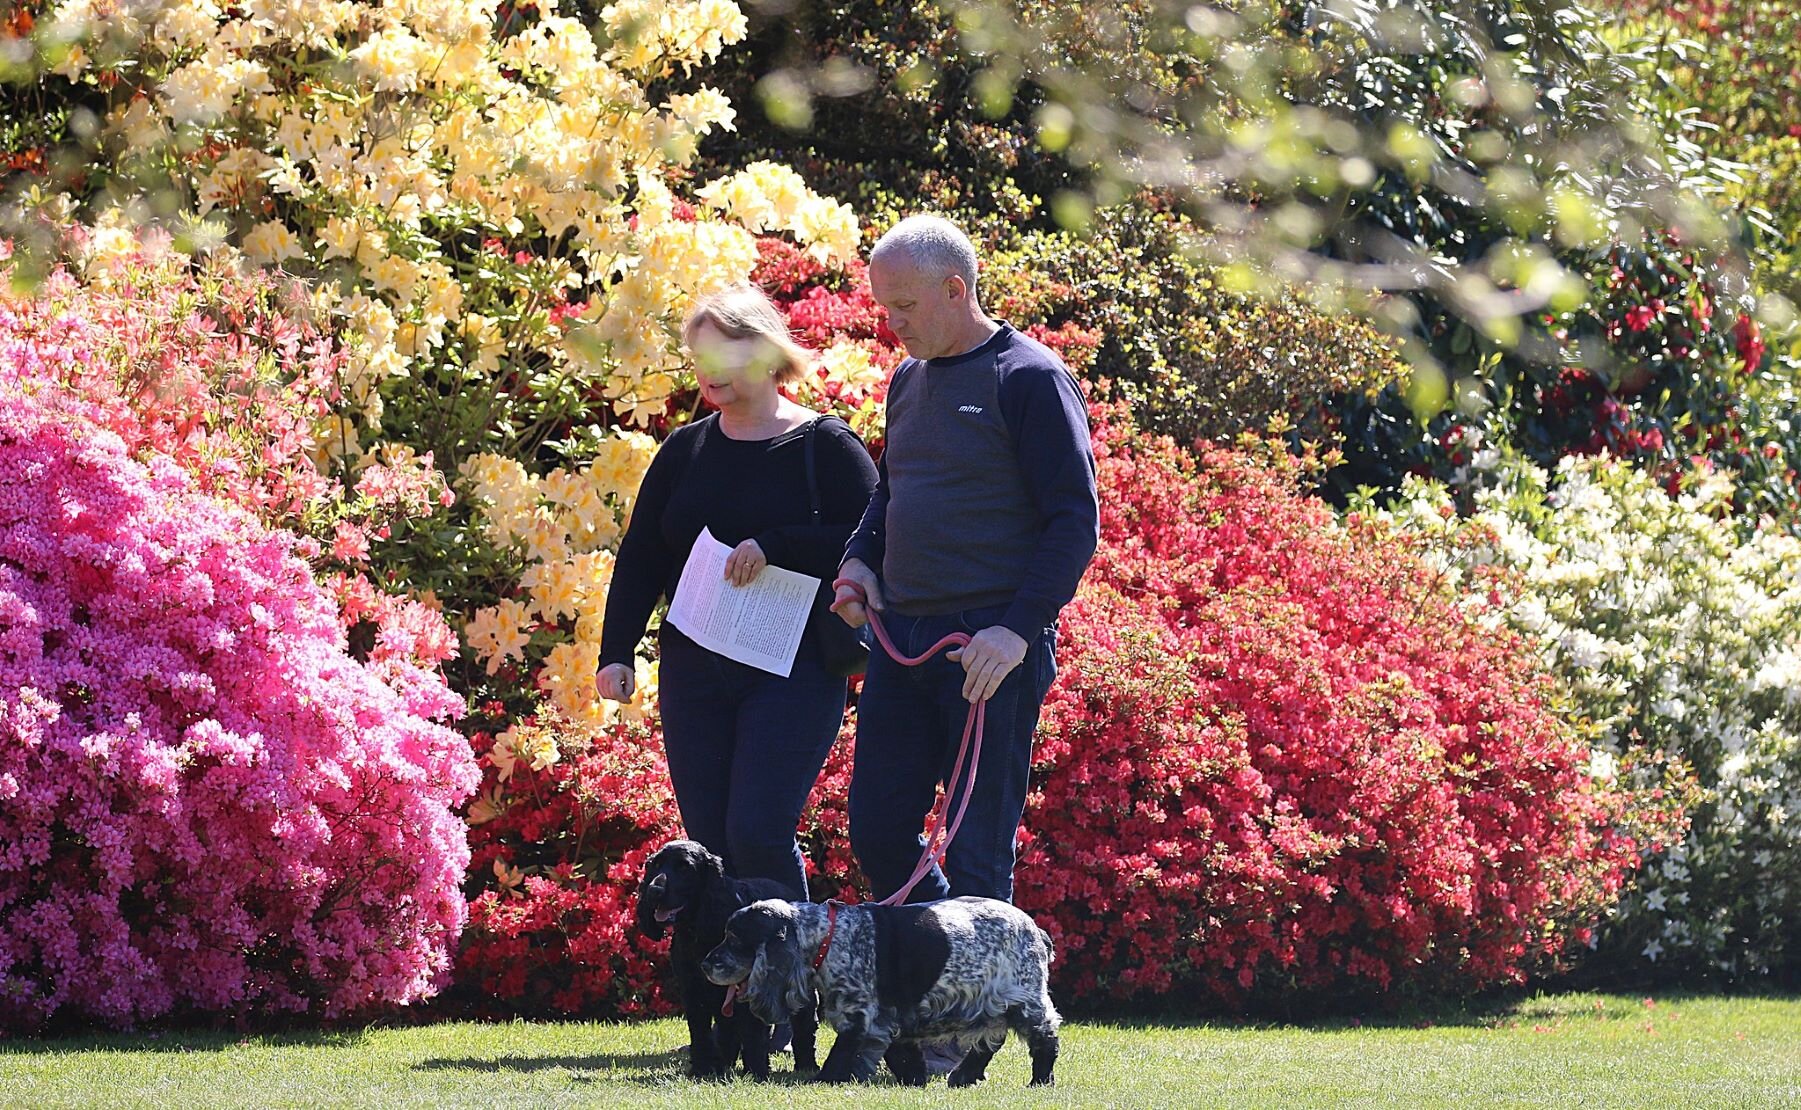 Couple with dogs_low res.jpg